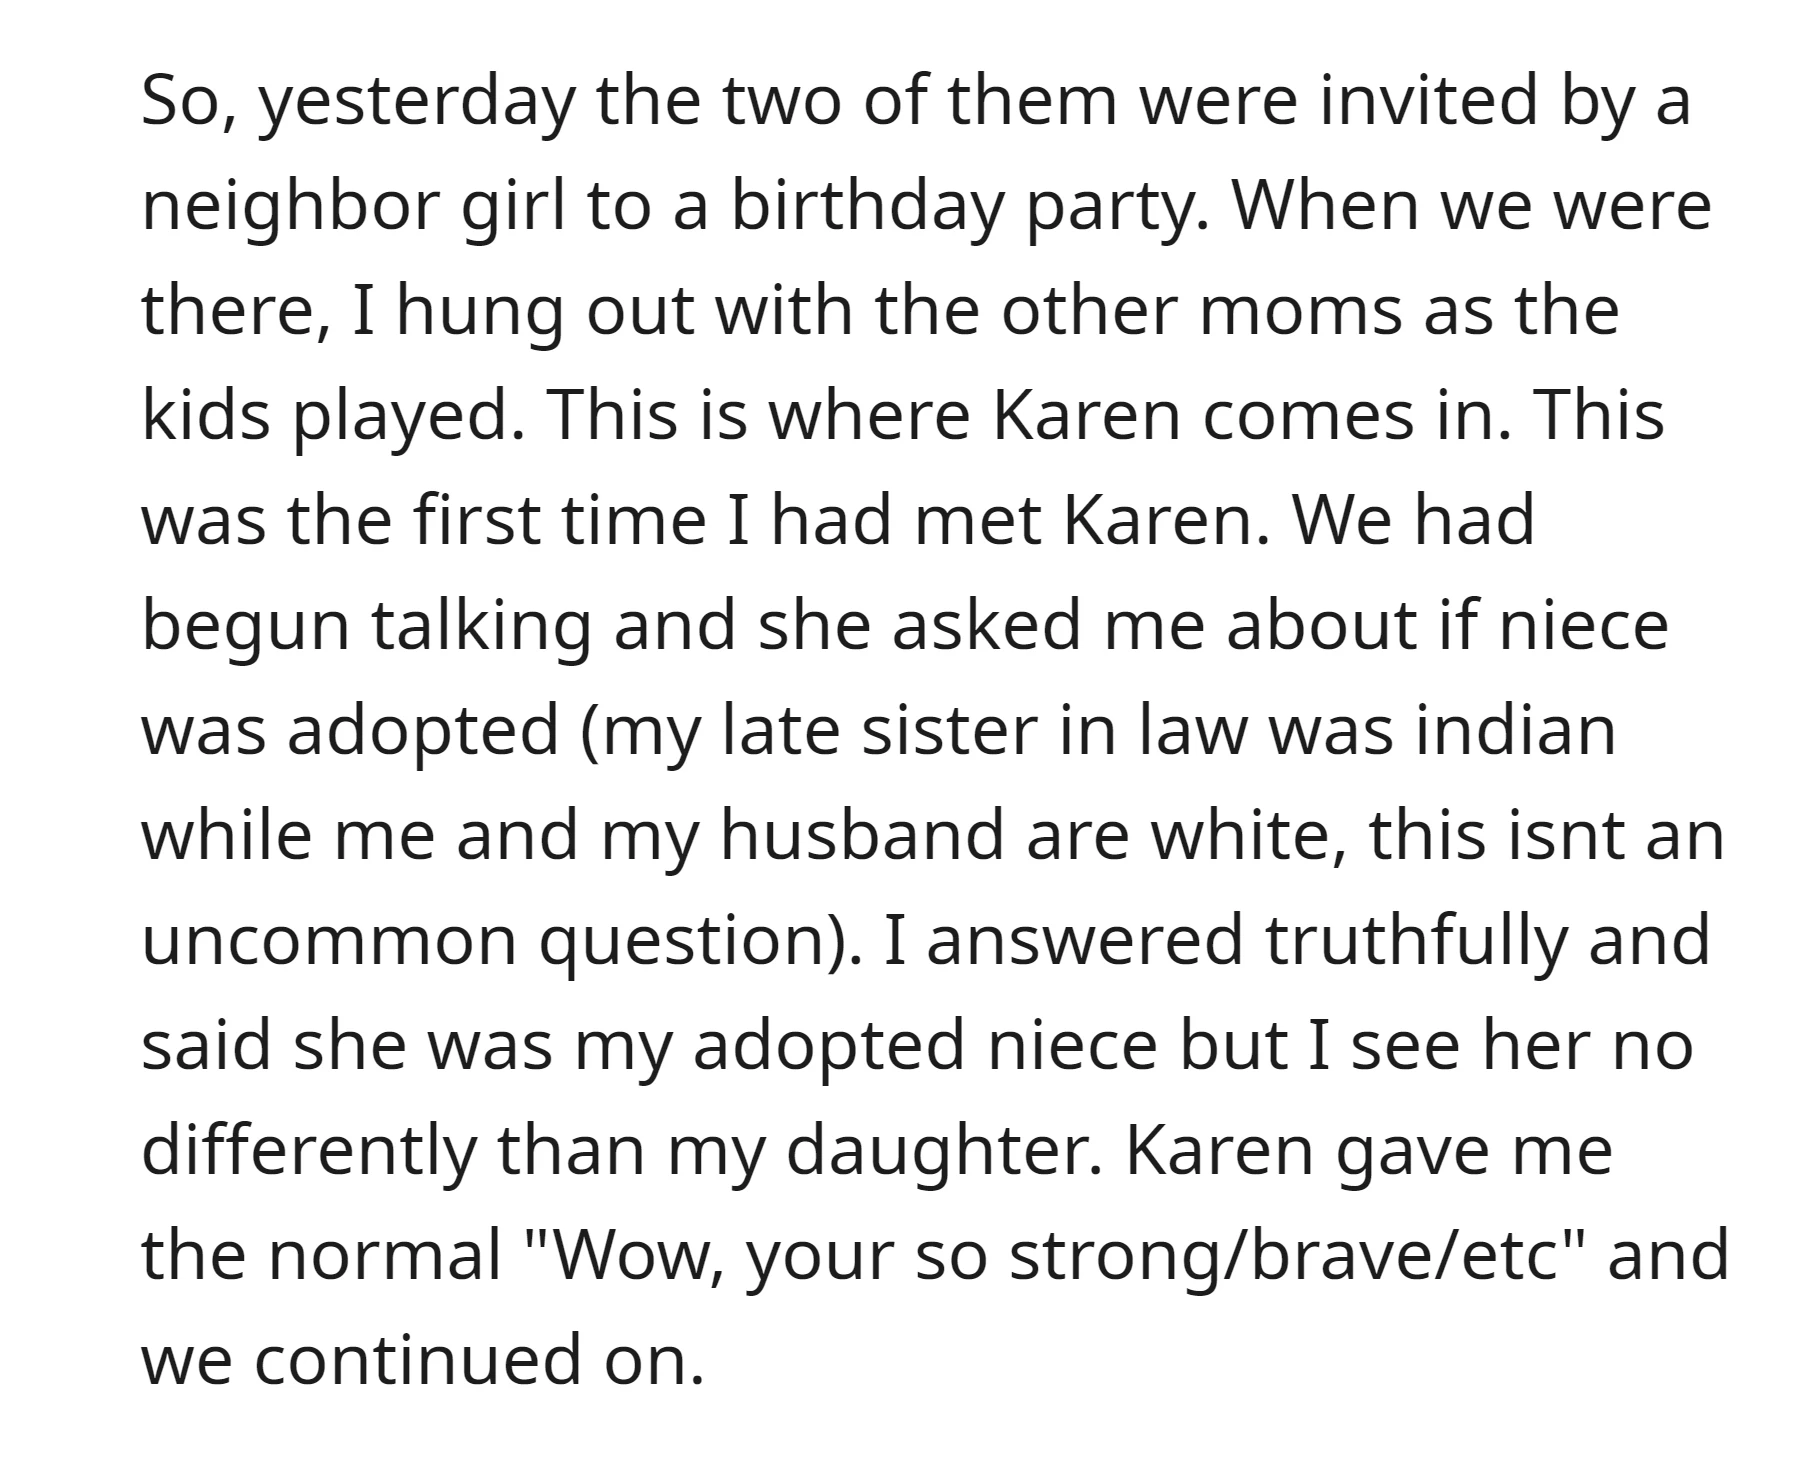 A Karen asked the OP if her adopted niece was adopted